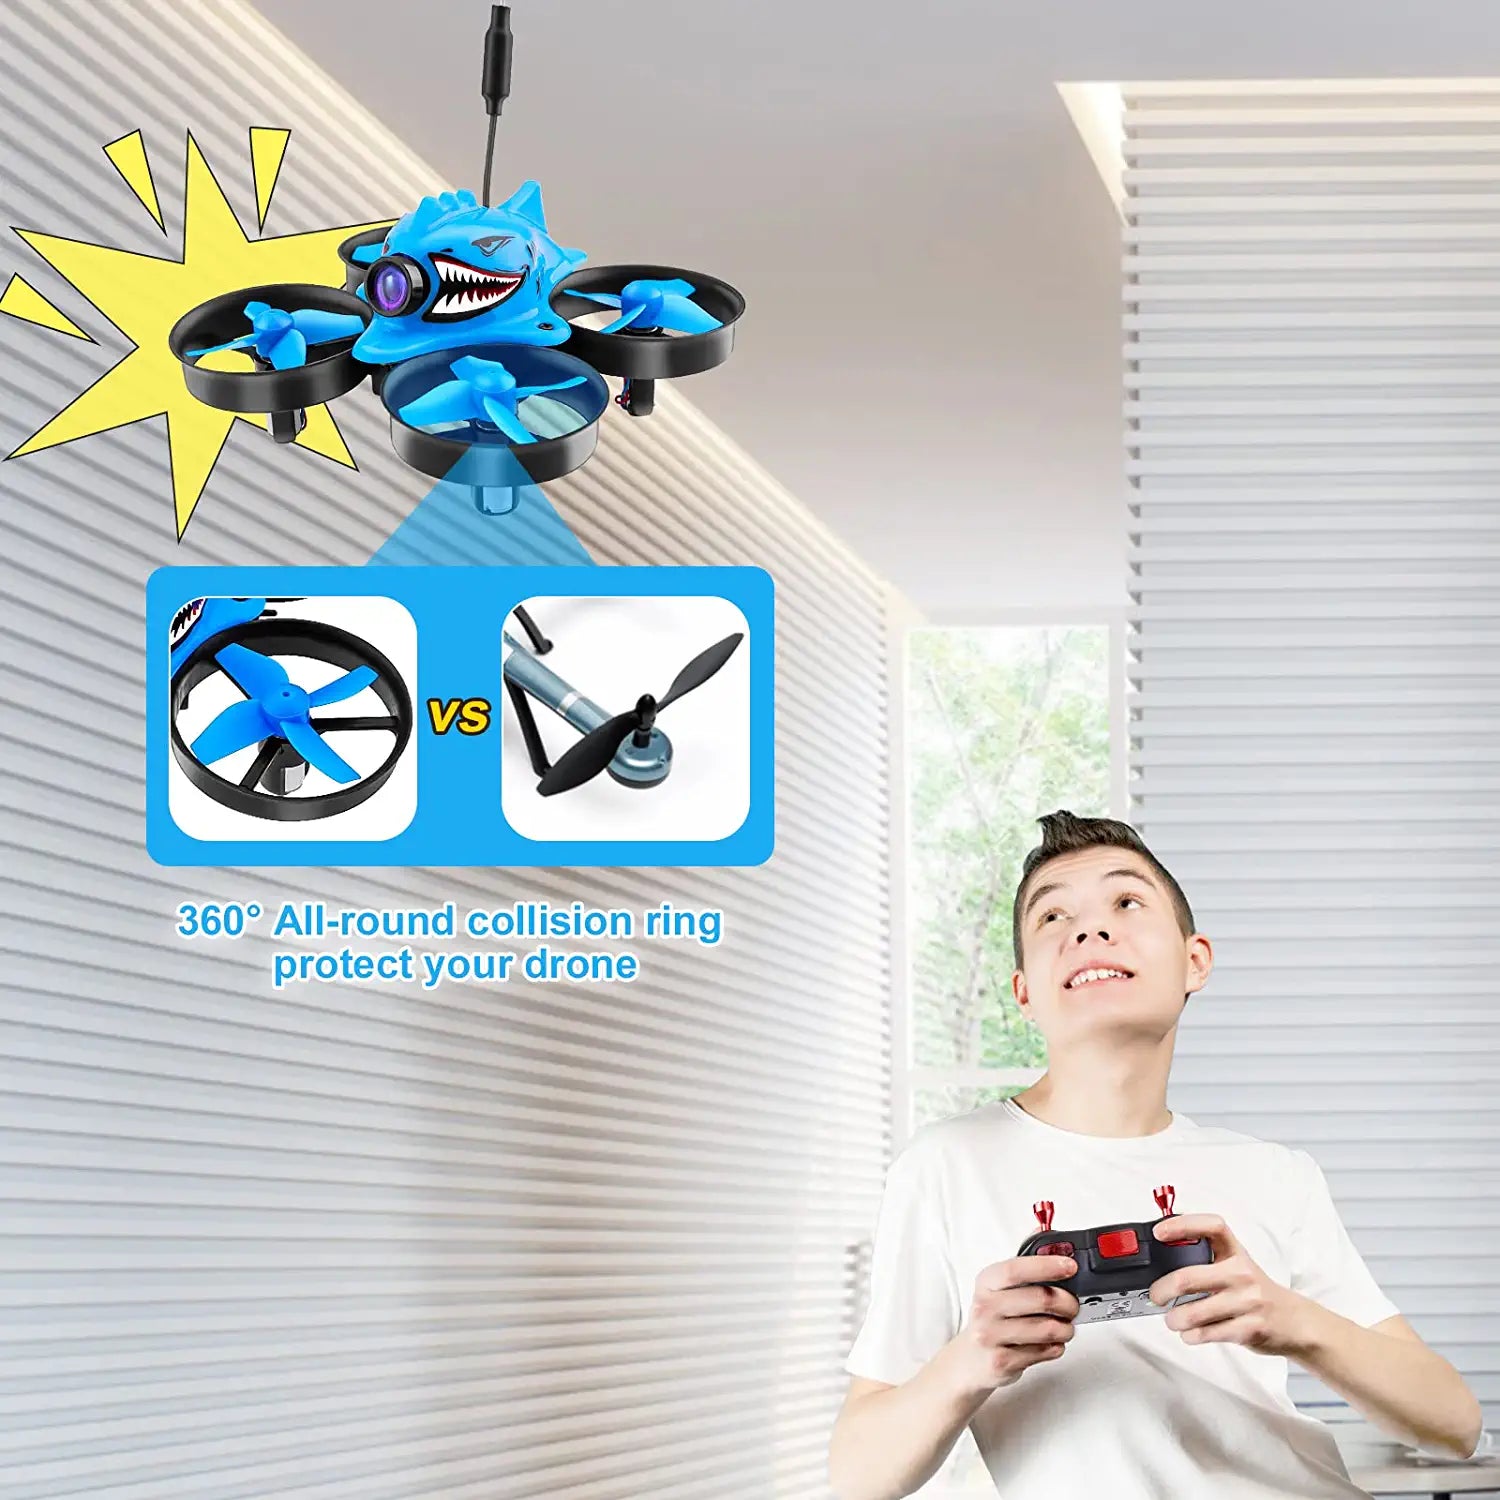 Blue Micro FPV Racing Drone with FPV Goggles 5.8G 40CH 800TVL Camera +  Battery